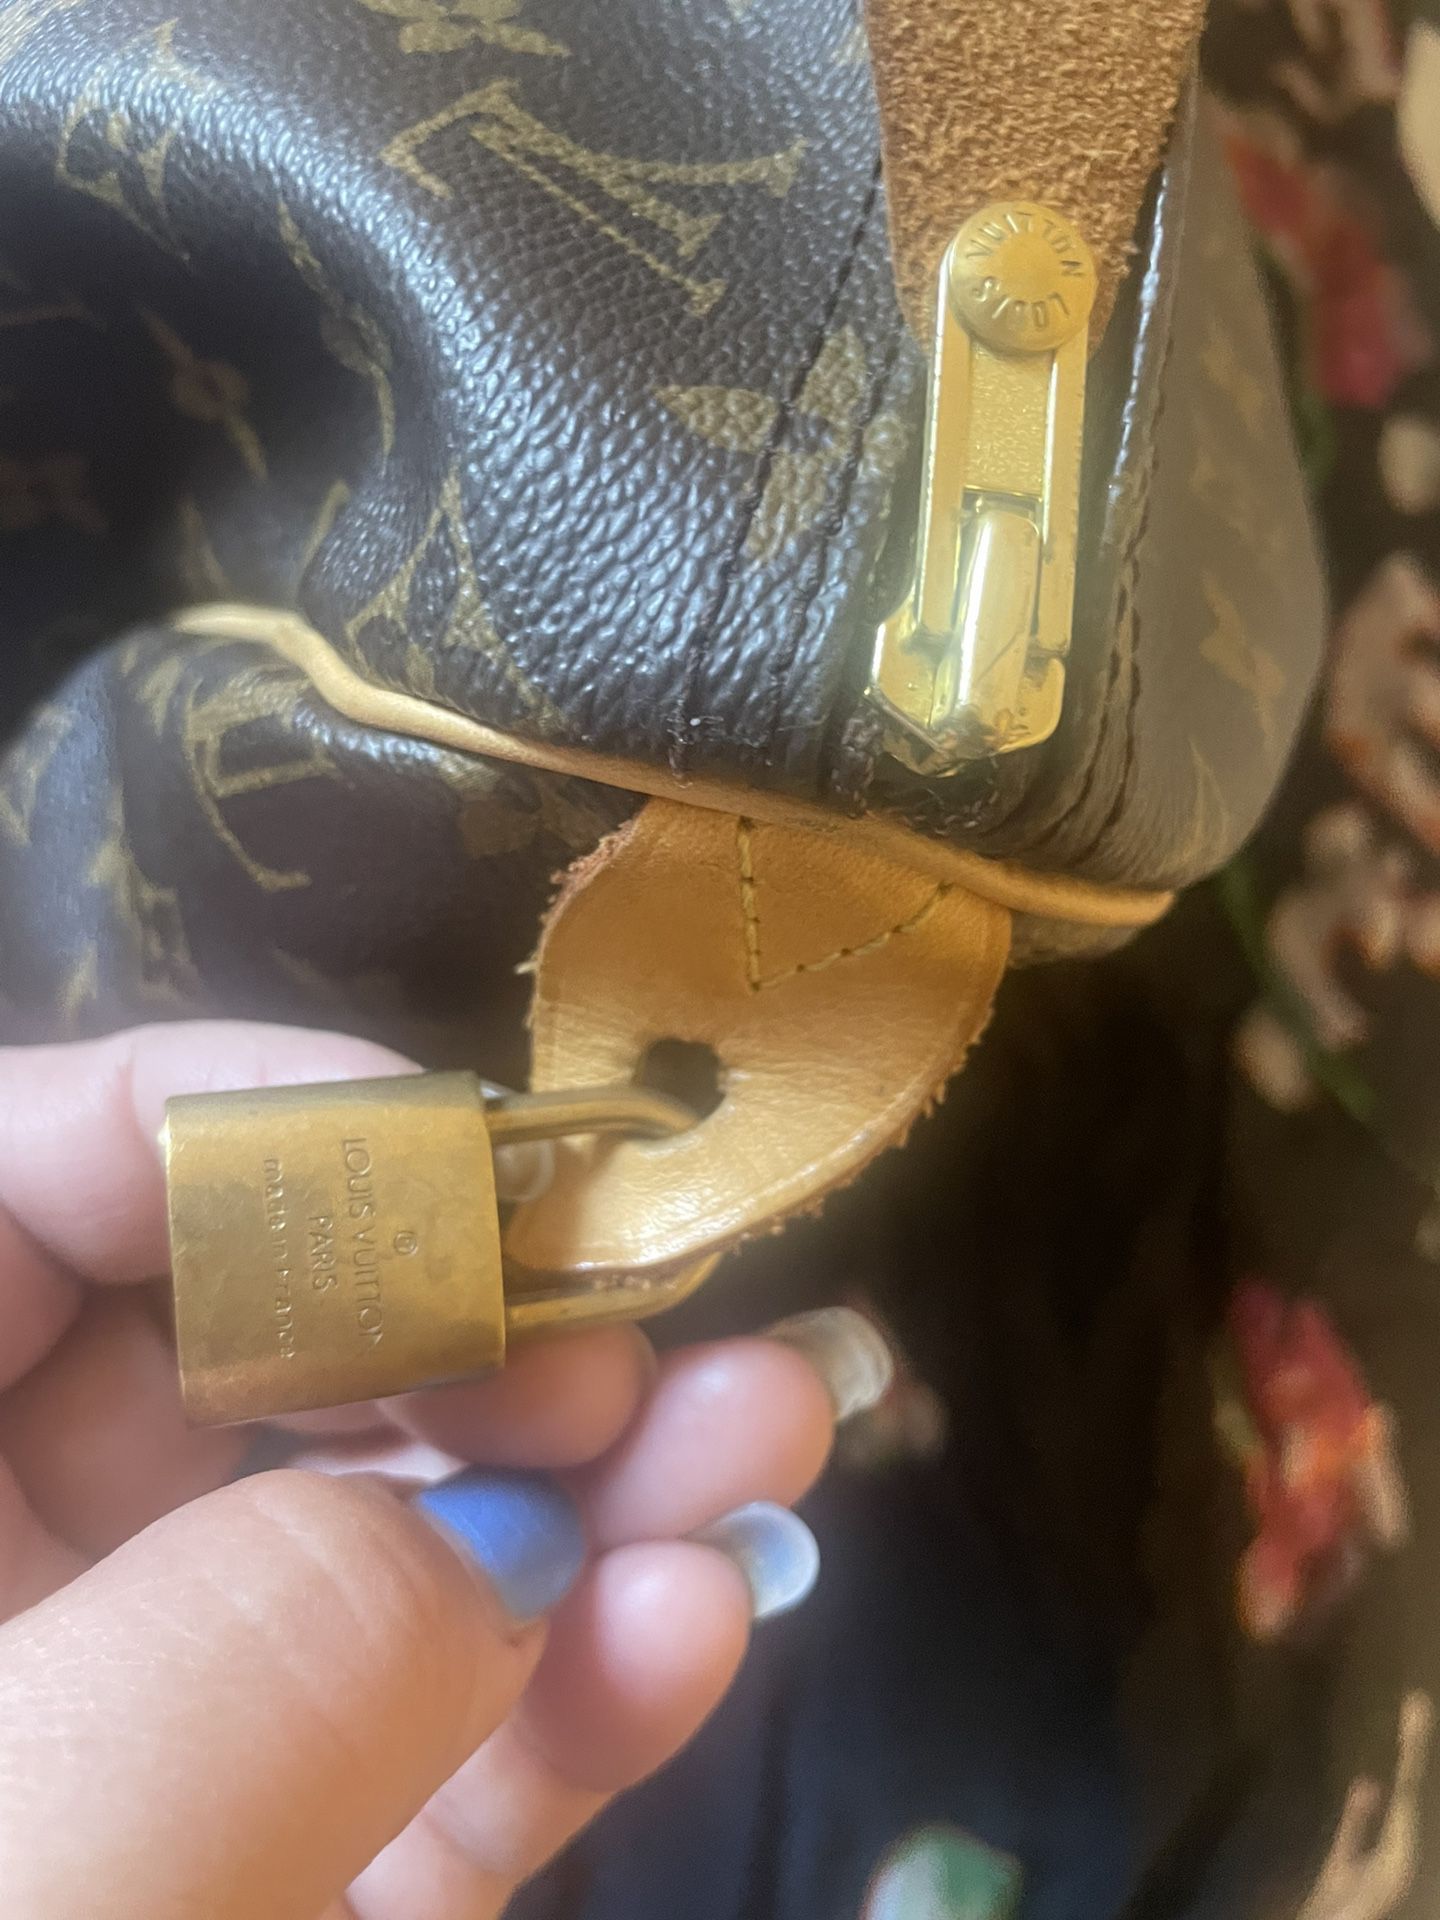 Louis Vuitton Etoile Bowling Bag $600 for Sale in Indian Wells, CA - OfferUp